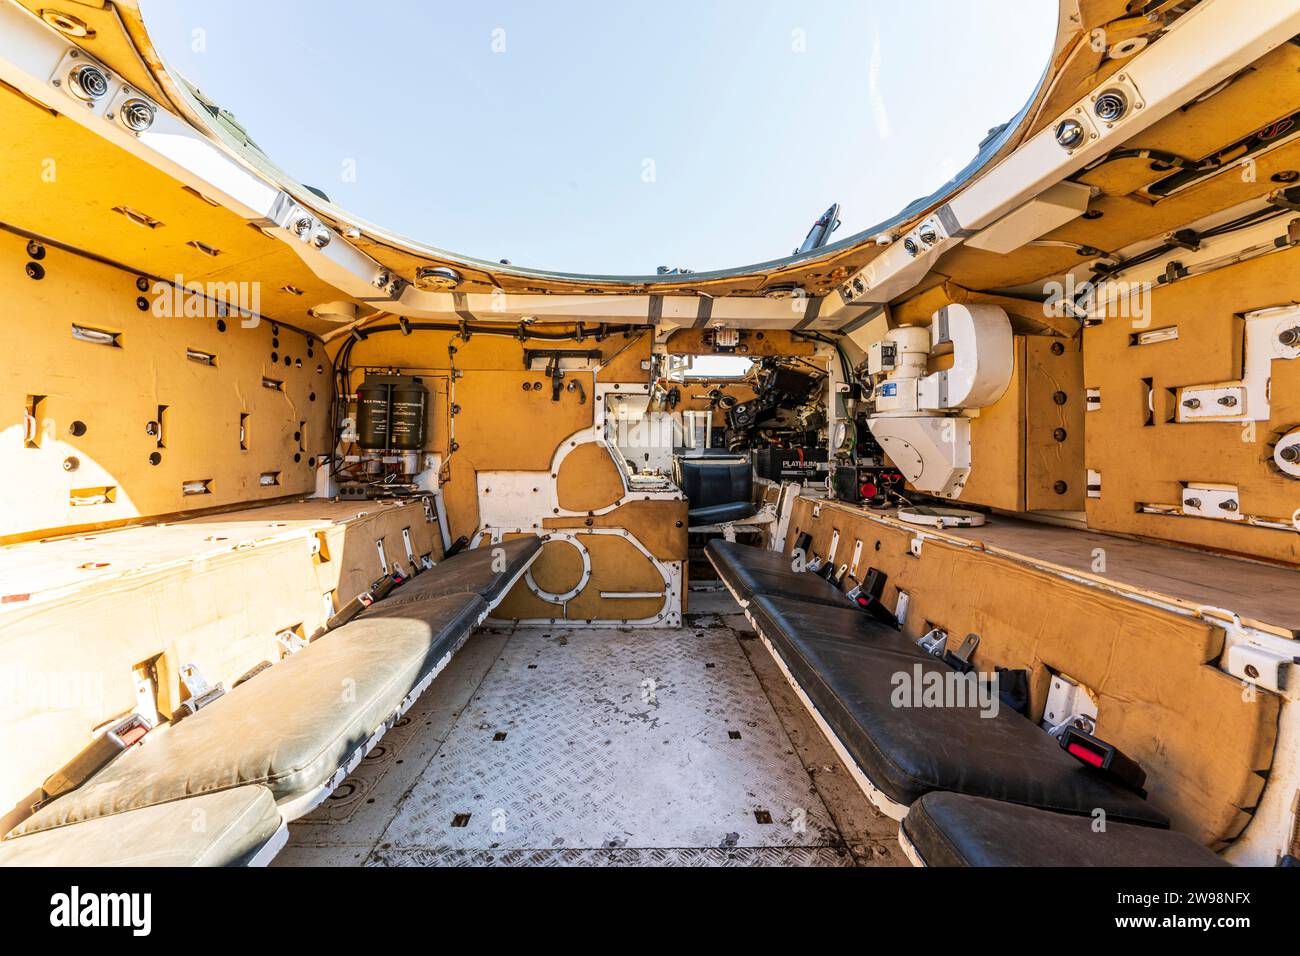 Interior of a decommissioned British FV432 armoured personal carrier, showing seating for the passengers. Open topped with blue sky. Stock Photo